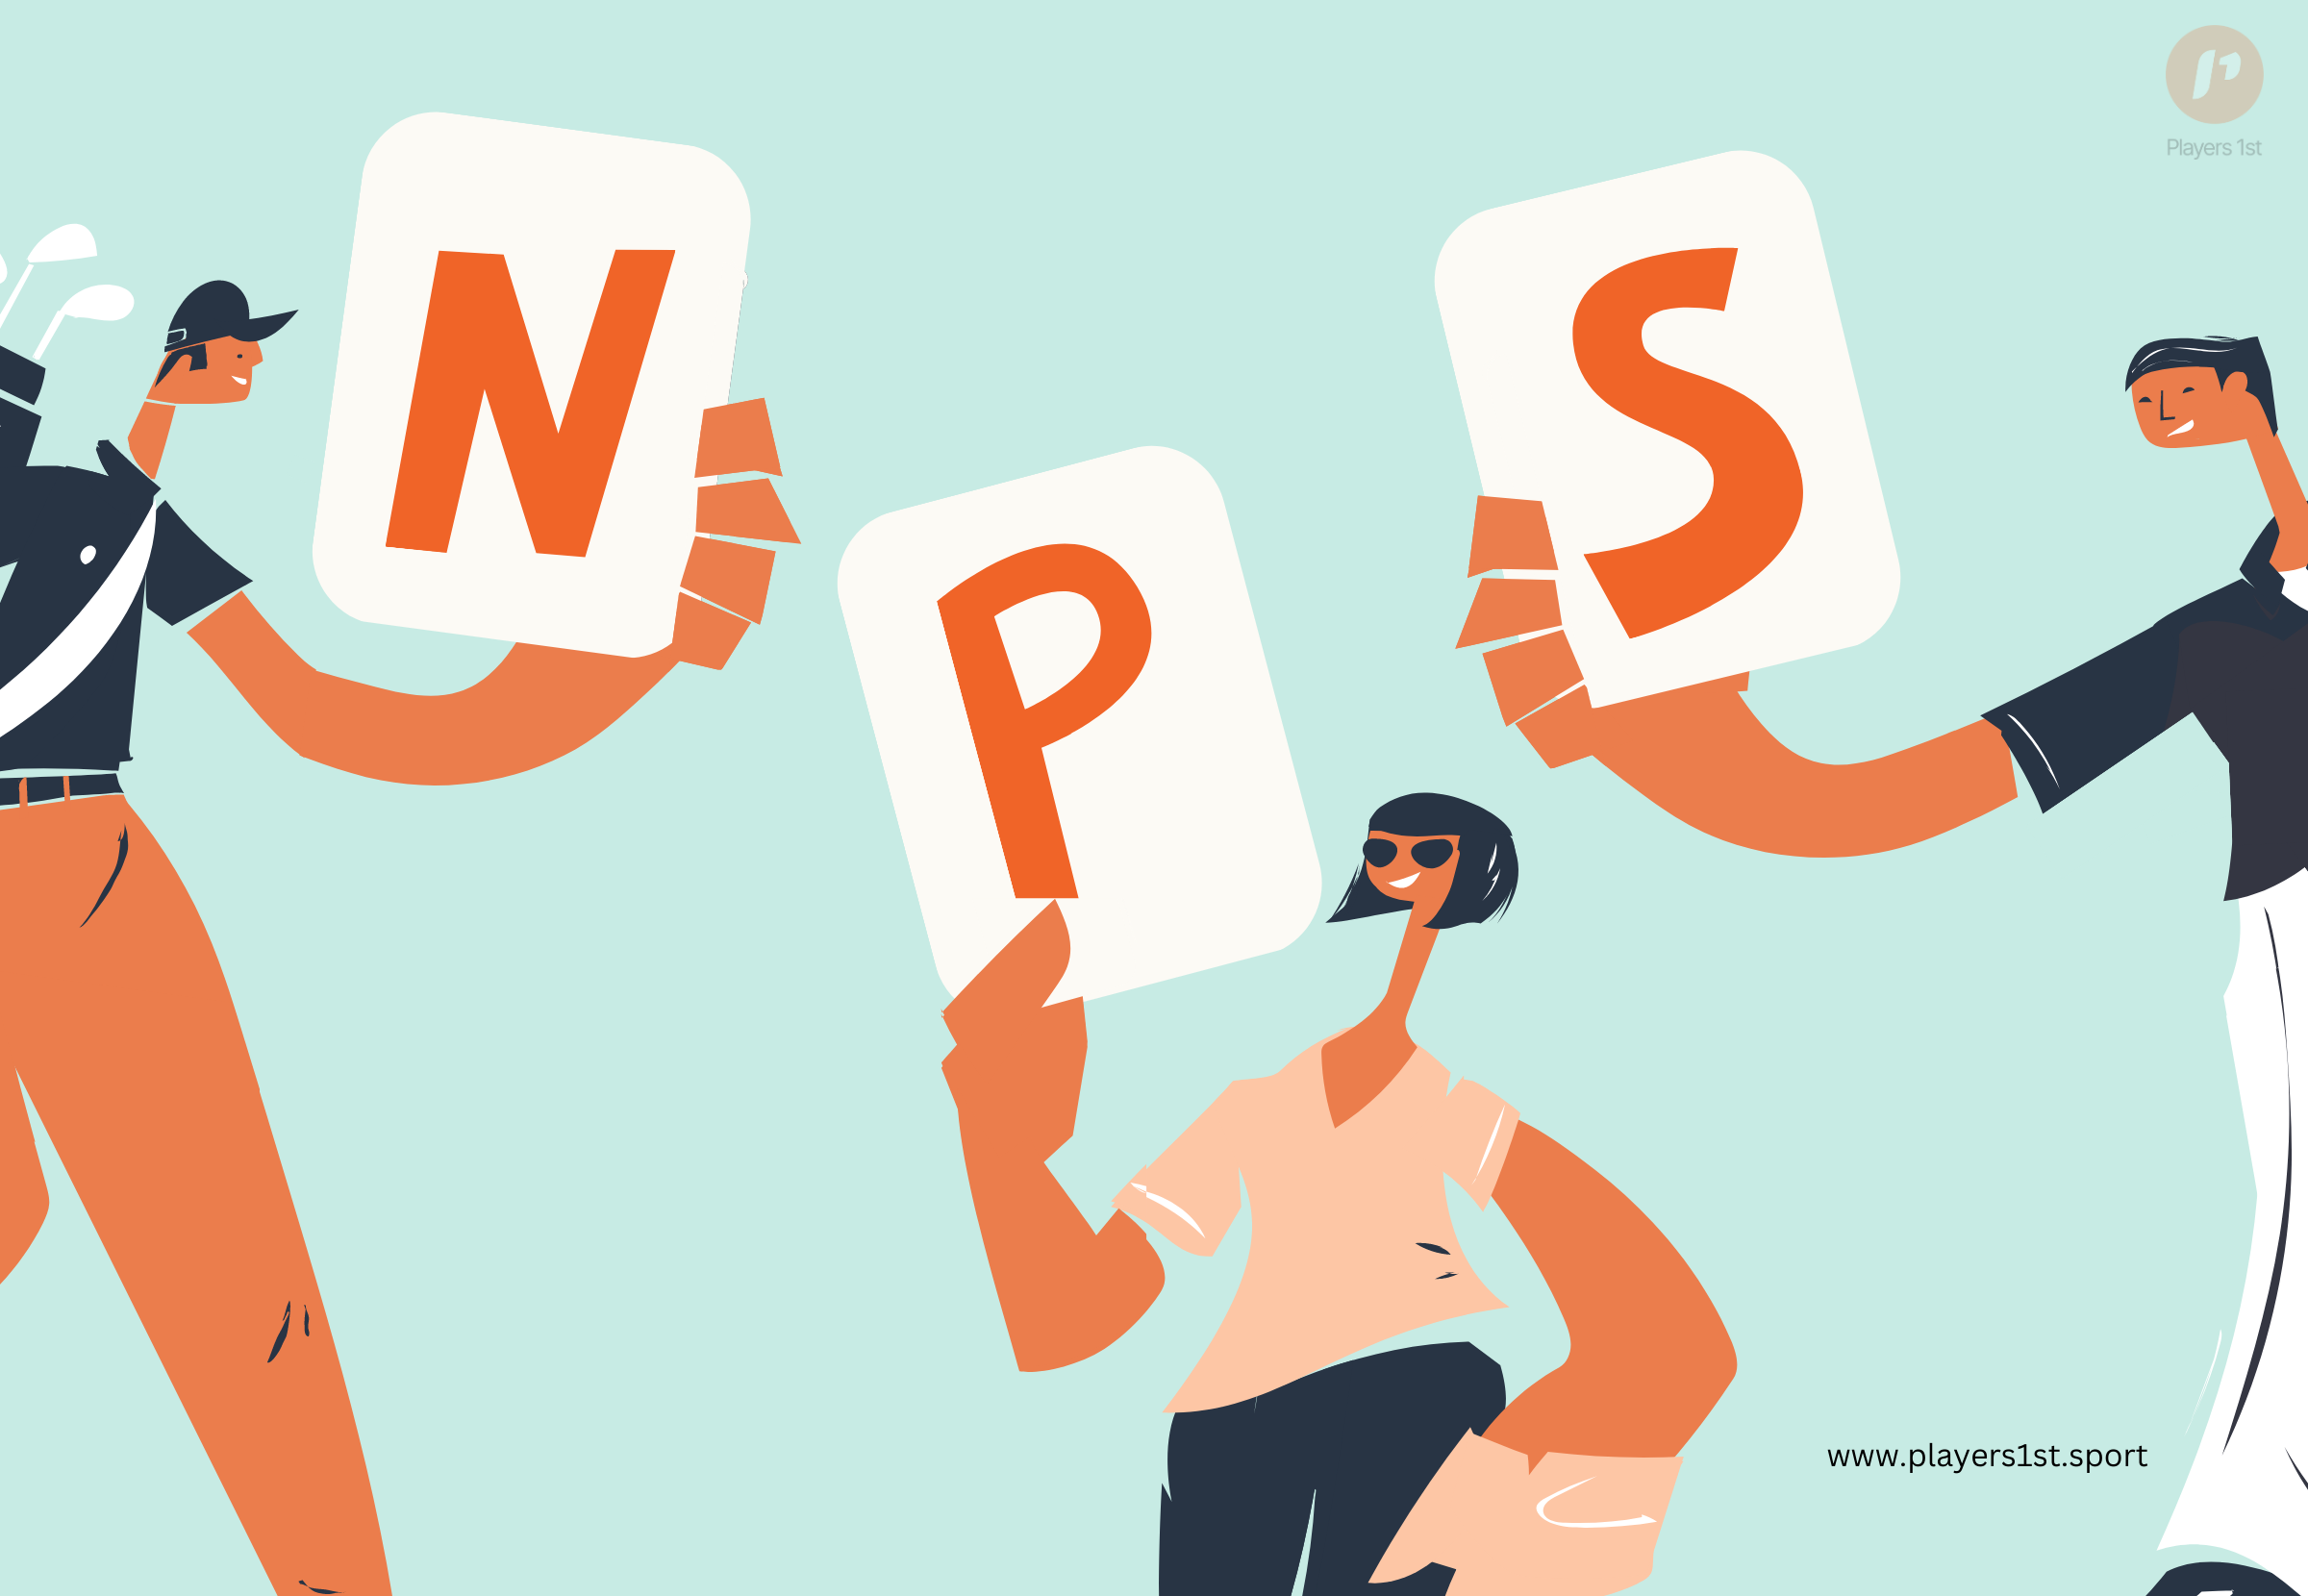 Net Promoter Score (NPS) is used to measure member satisfaction and loyalty by asking one simple question: "On a scale from 0-10, how likely are you to recommend this club/product/service to a friend or colleague?". This NPS guide for golf clubs explains how it works. 